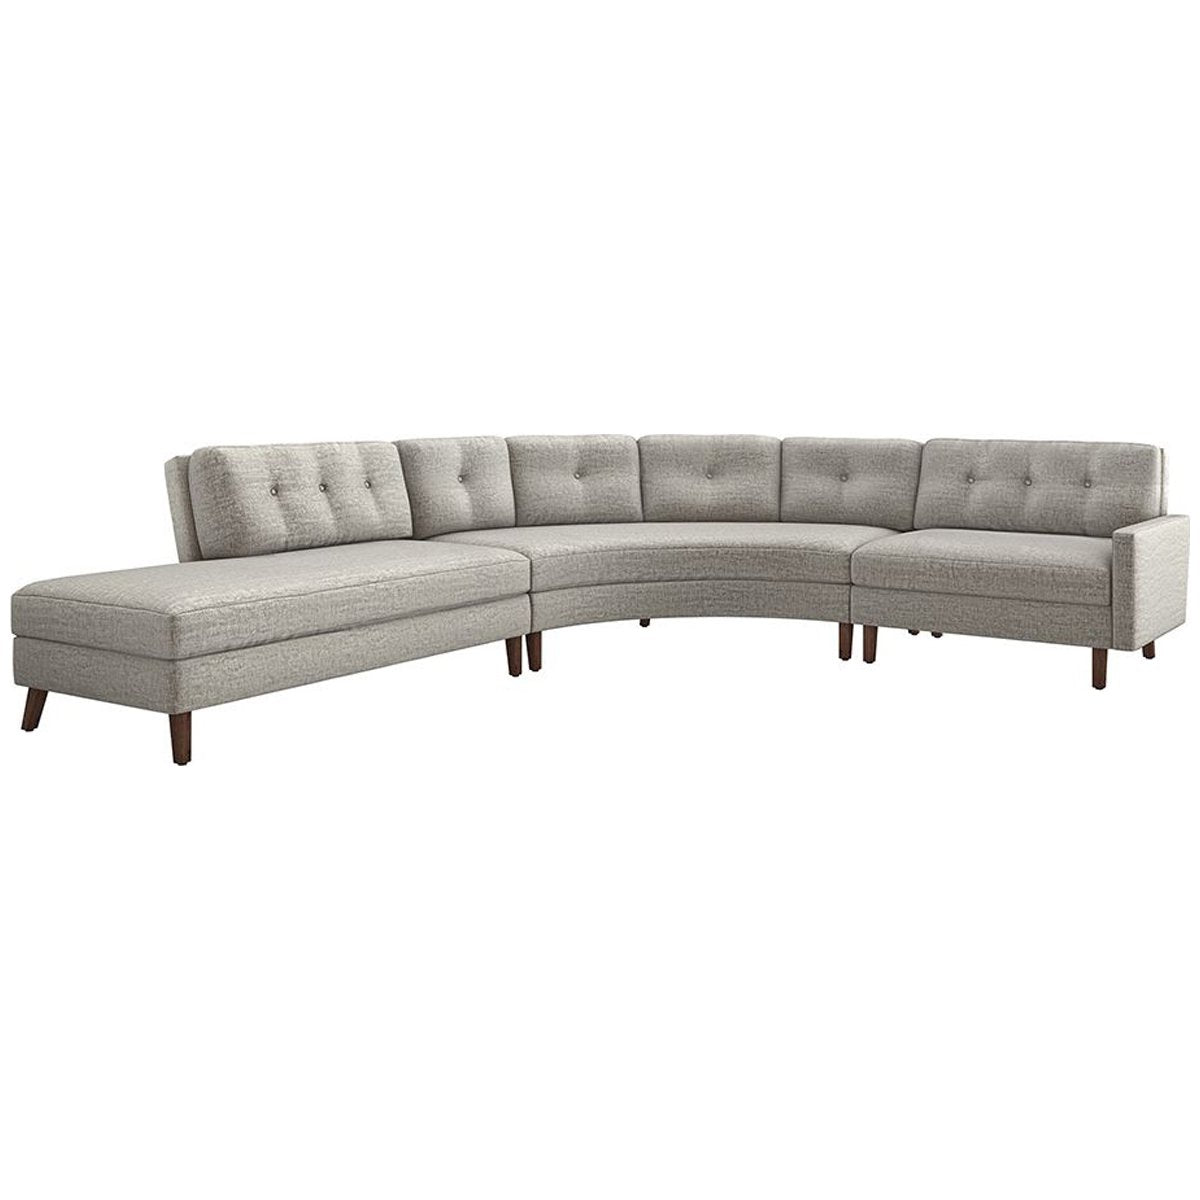 Interlude Home Aventura Feather Chaise 3-Piece Sectional